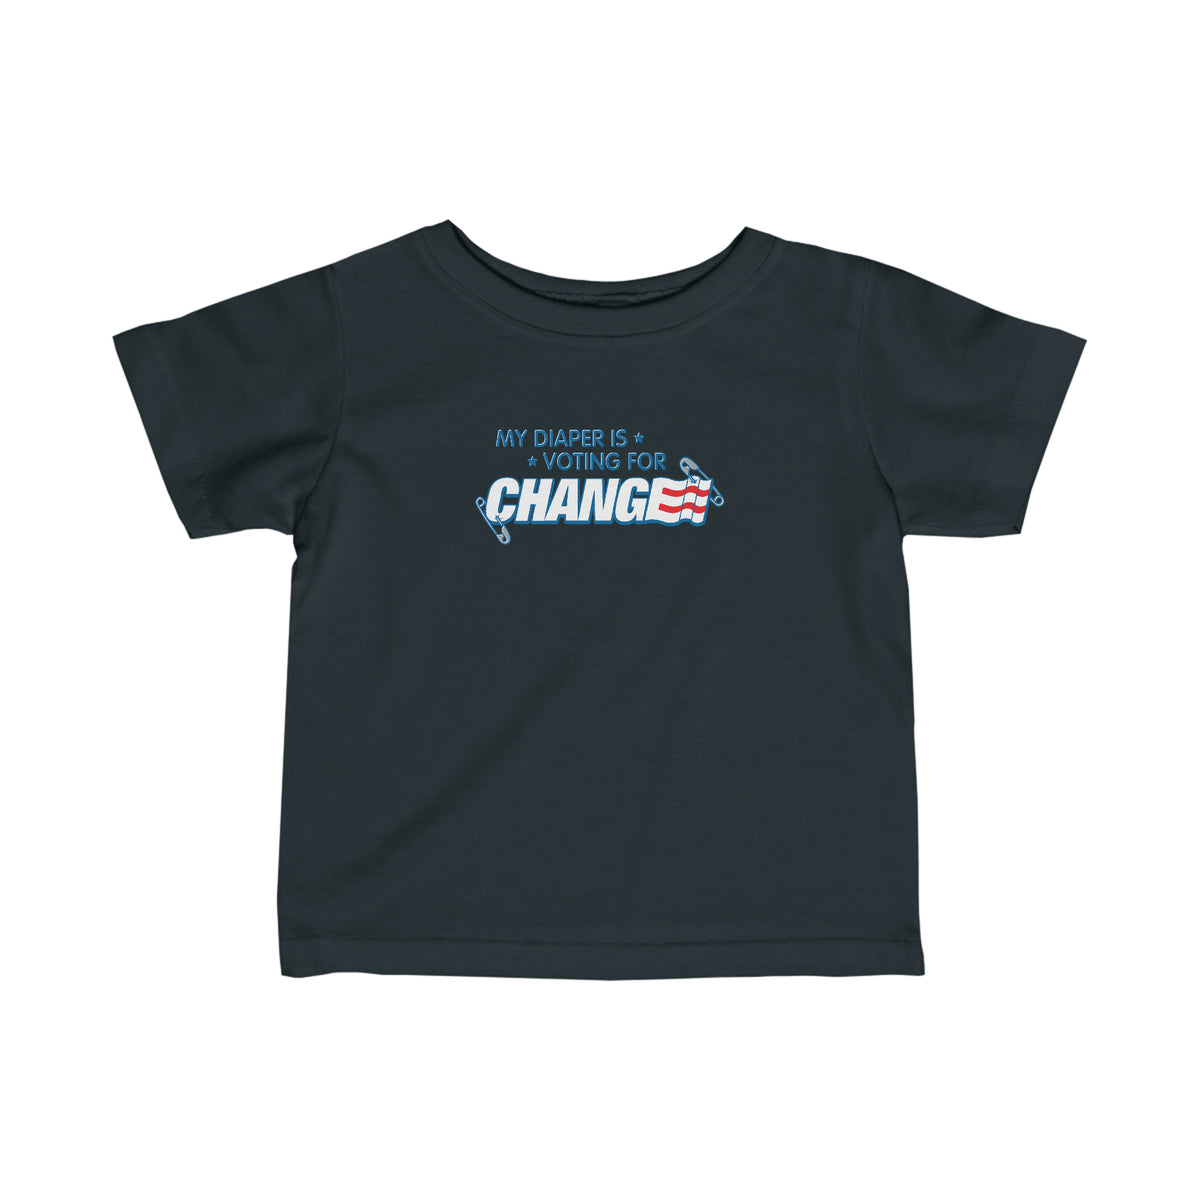 My Diaper Is Voting For Change - Baby T-Shirt